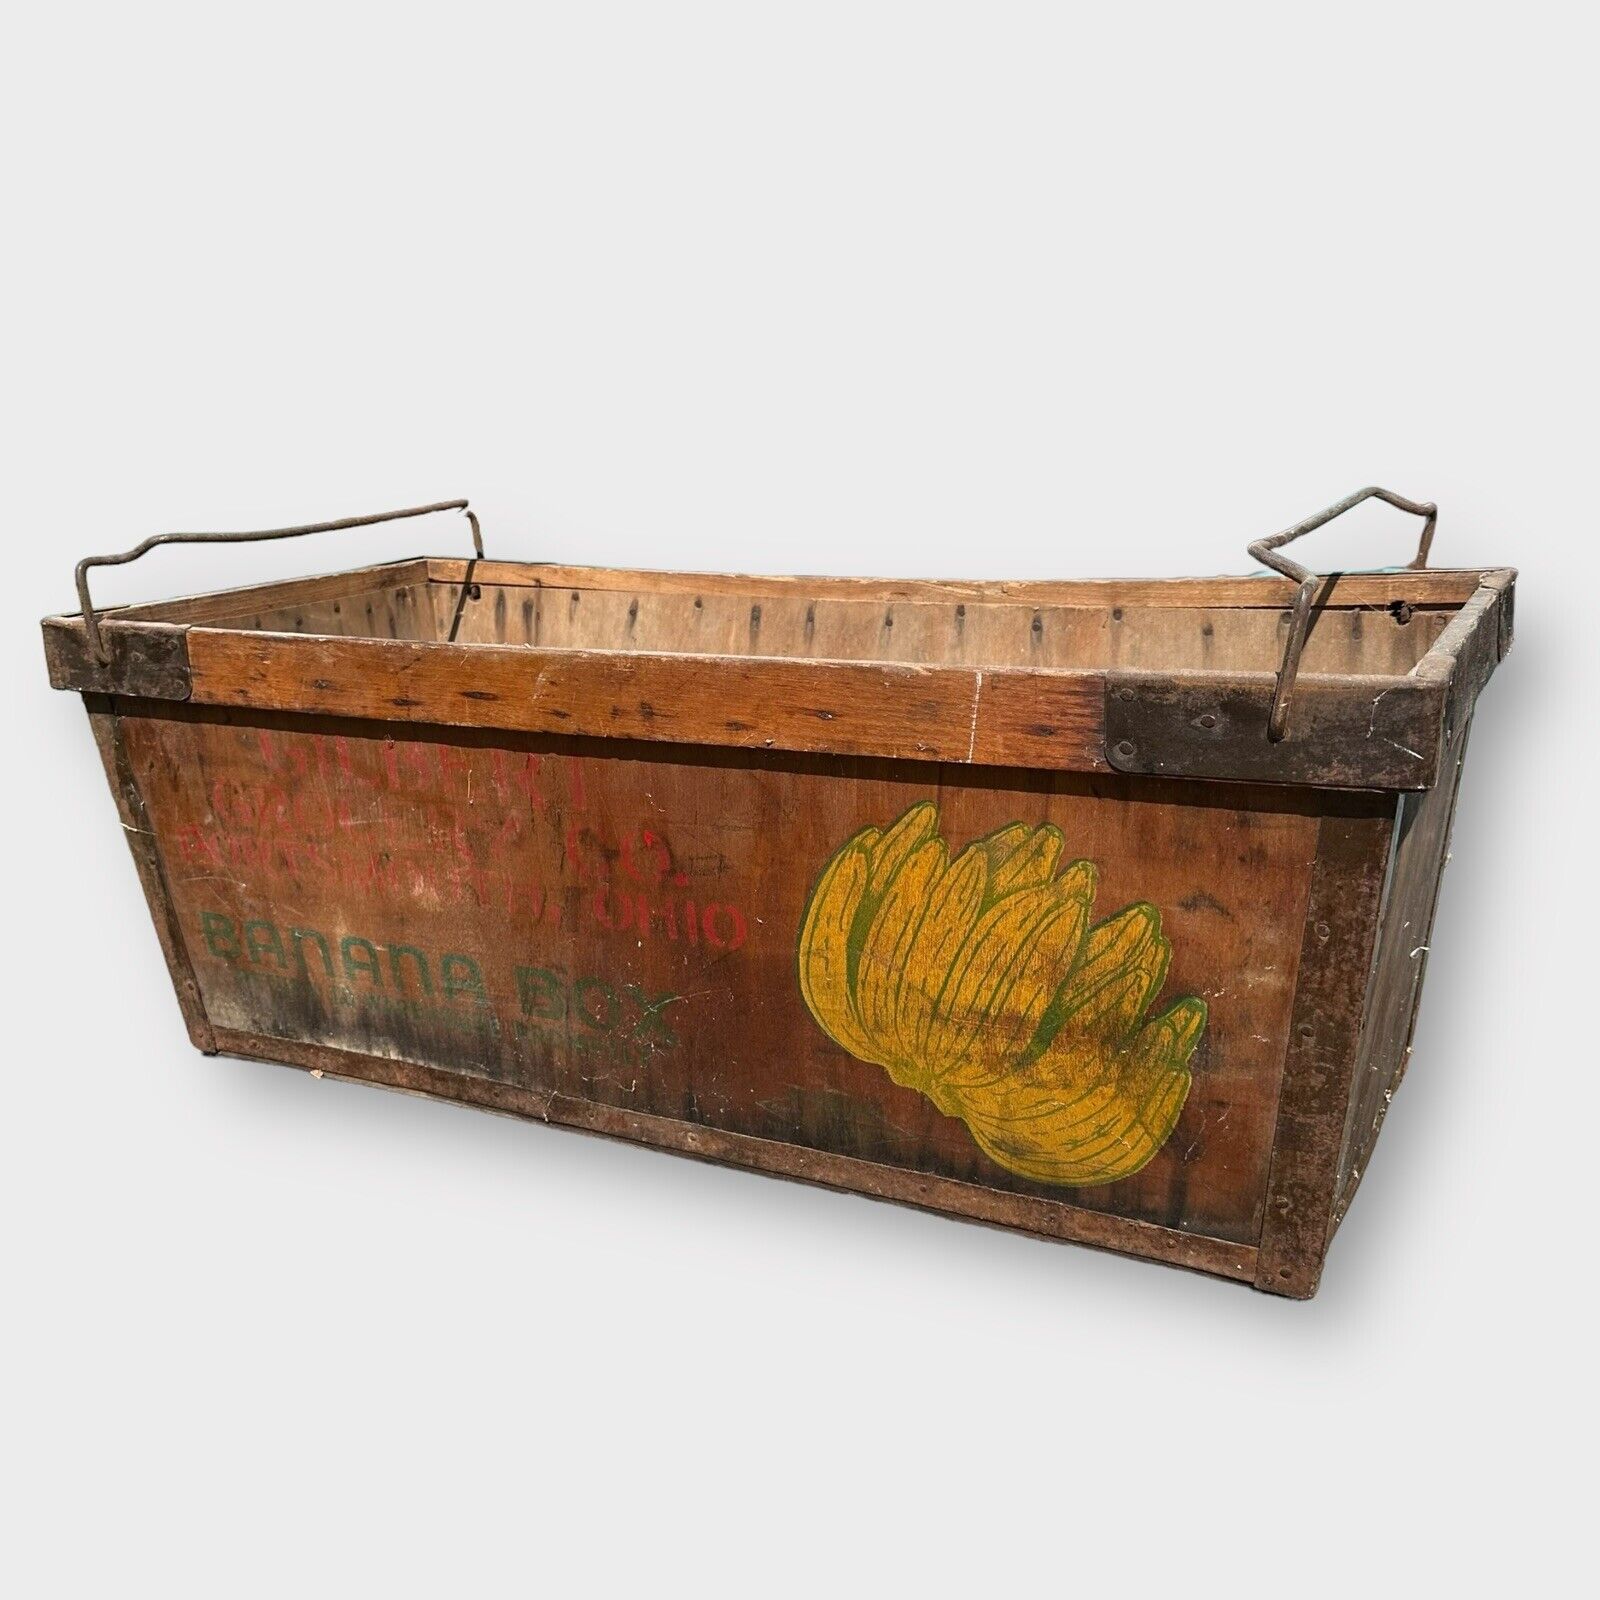 VTG Gilbert Grocery Wooden Banana Box Crate Primitive Rustic Decor Portsmouth OH